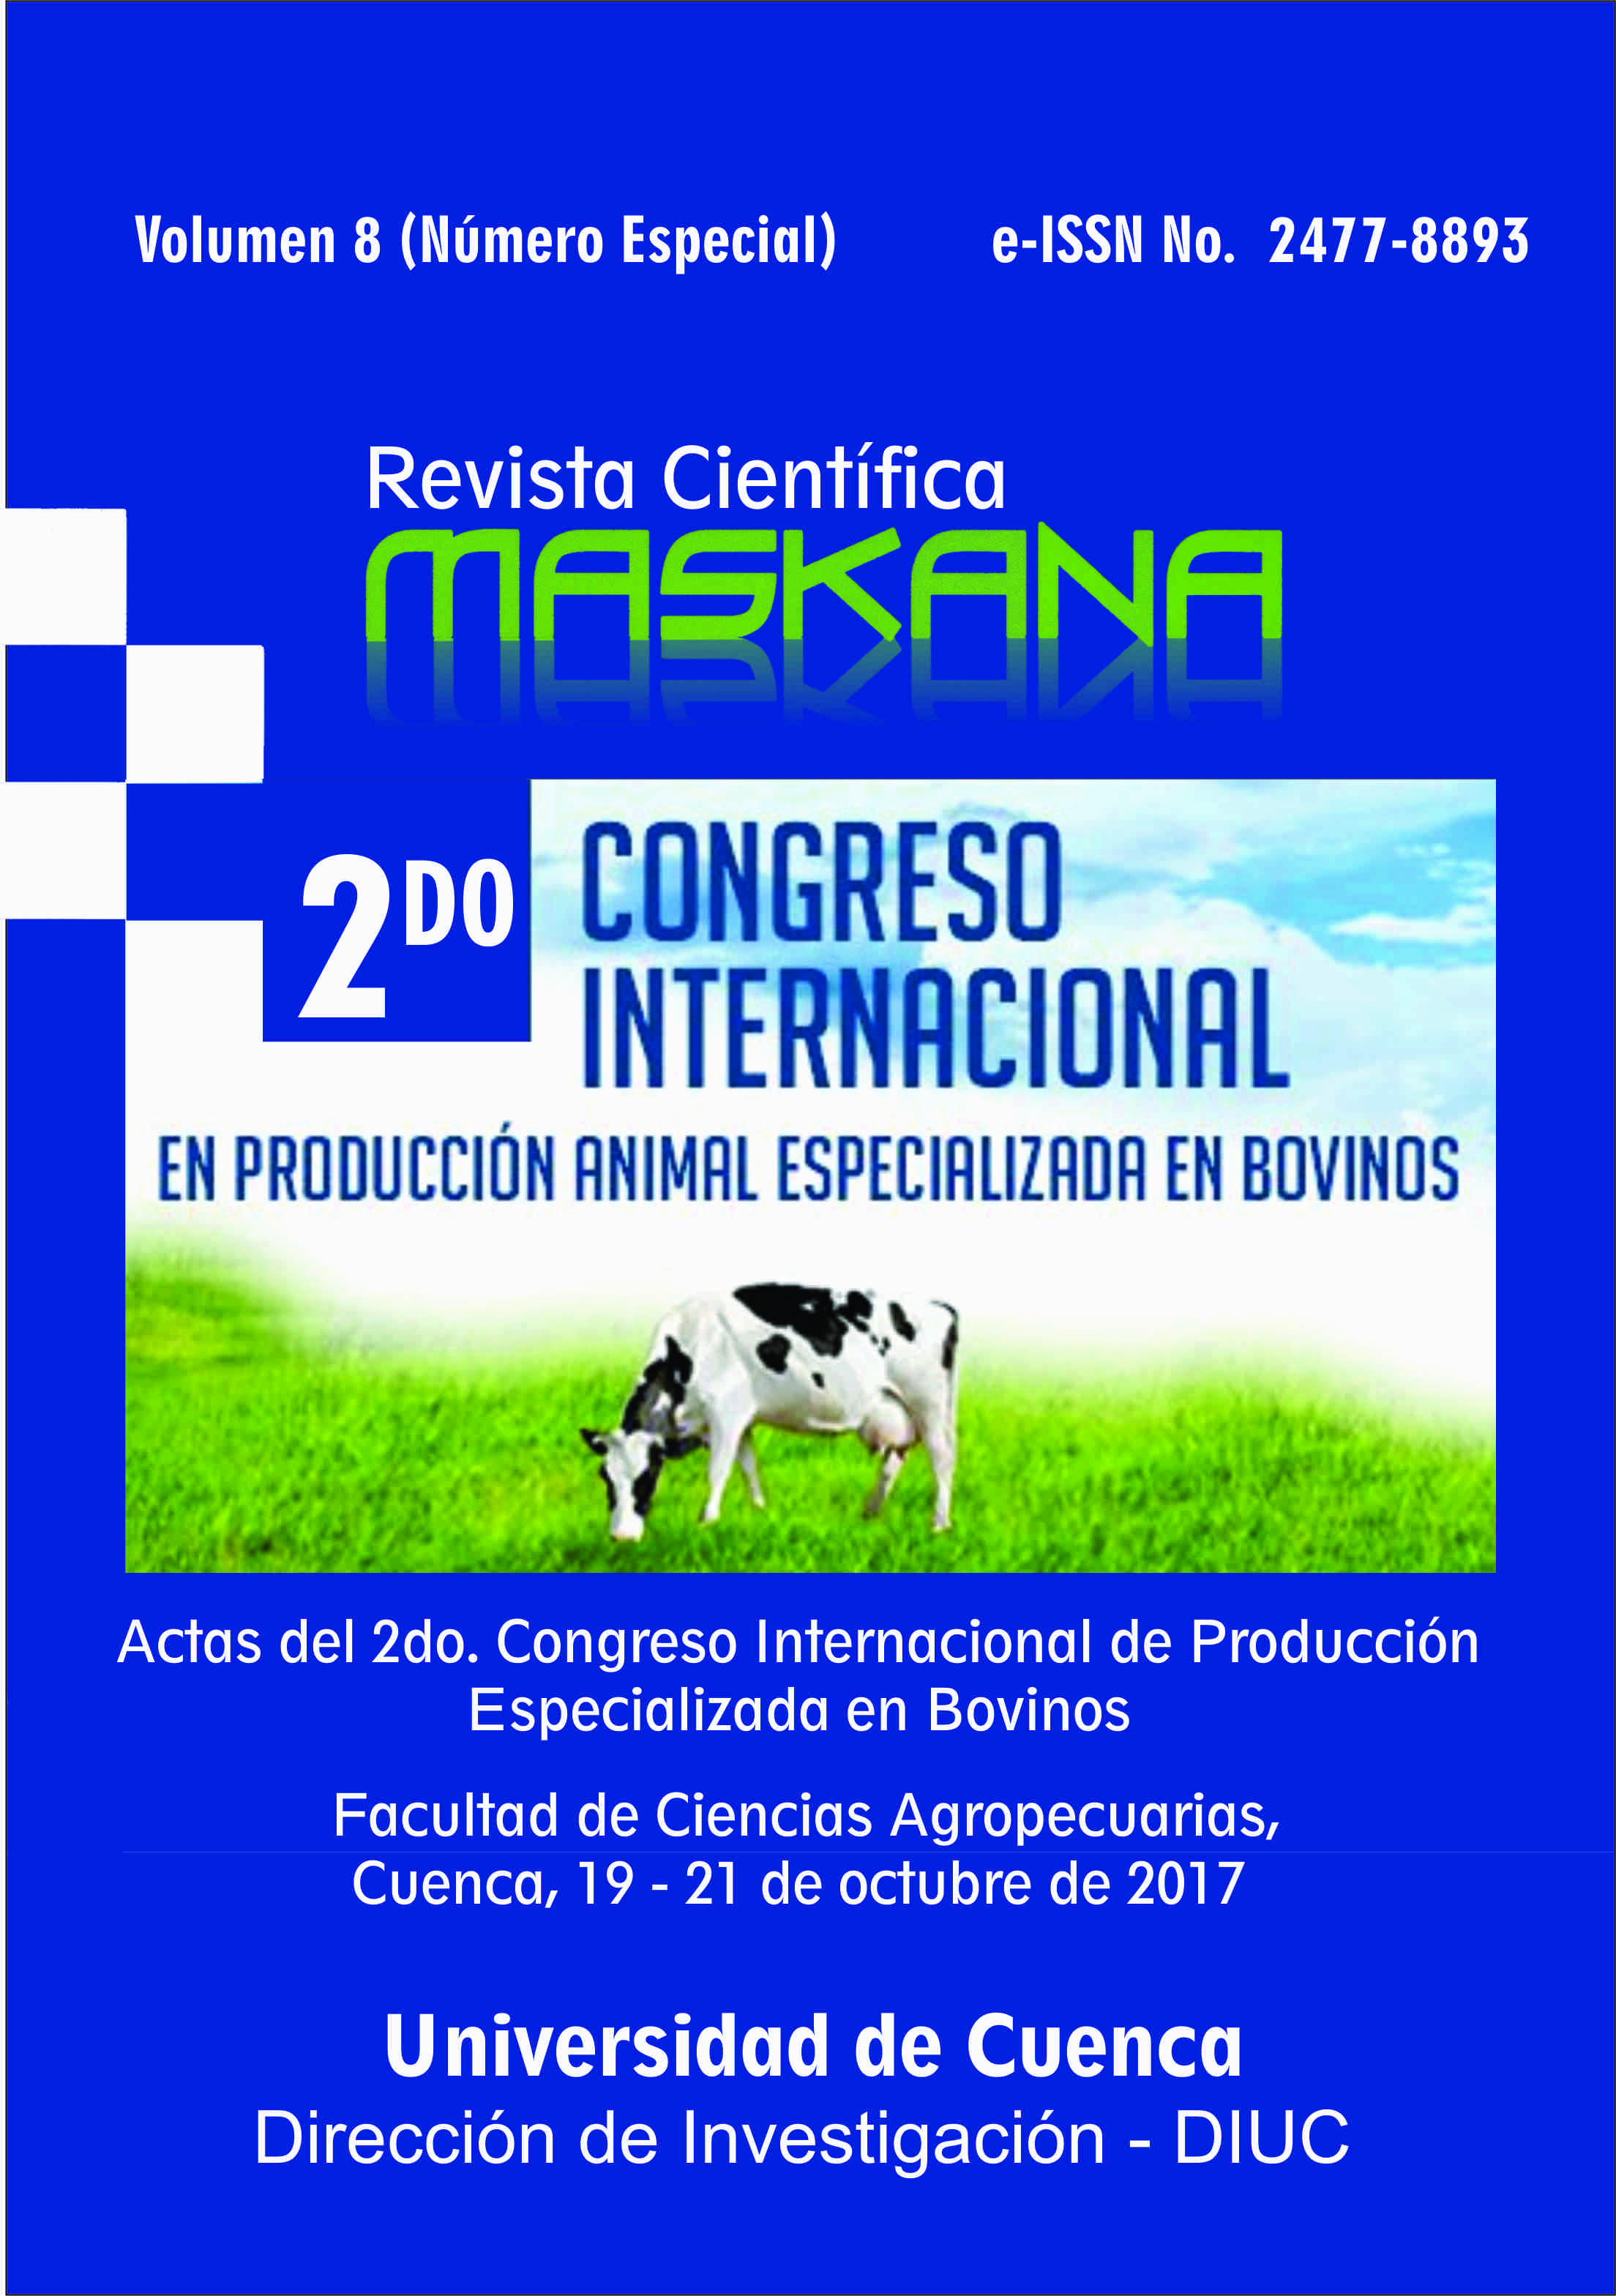 					View Vol. 8 (2017): Proceedings of the 2nd. International Congress of Animal Production Specialized in Bovines
				